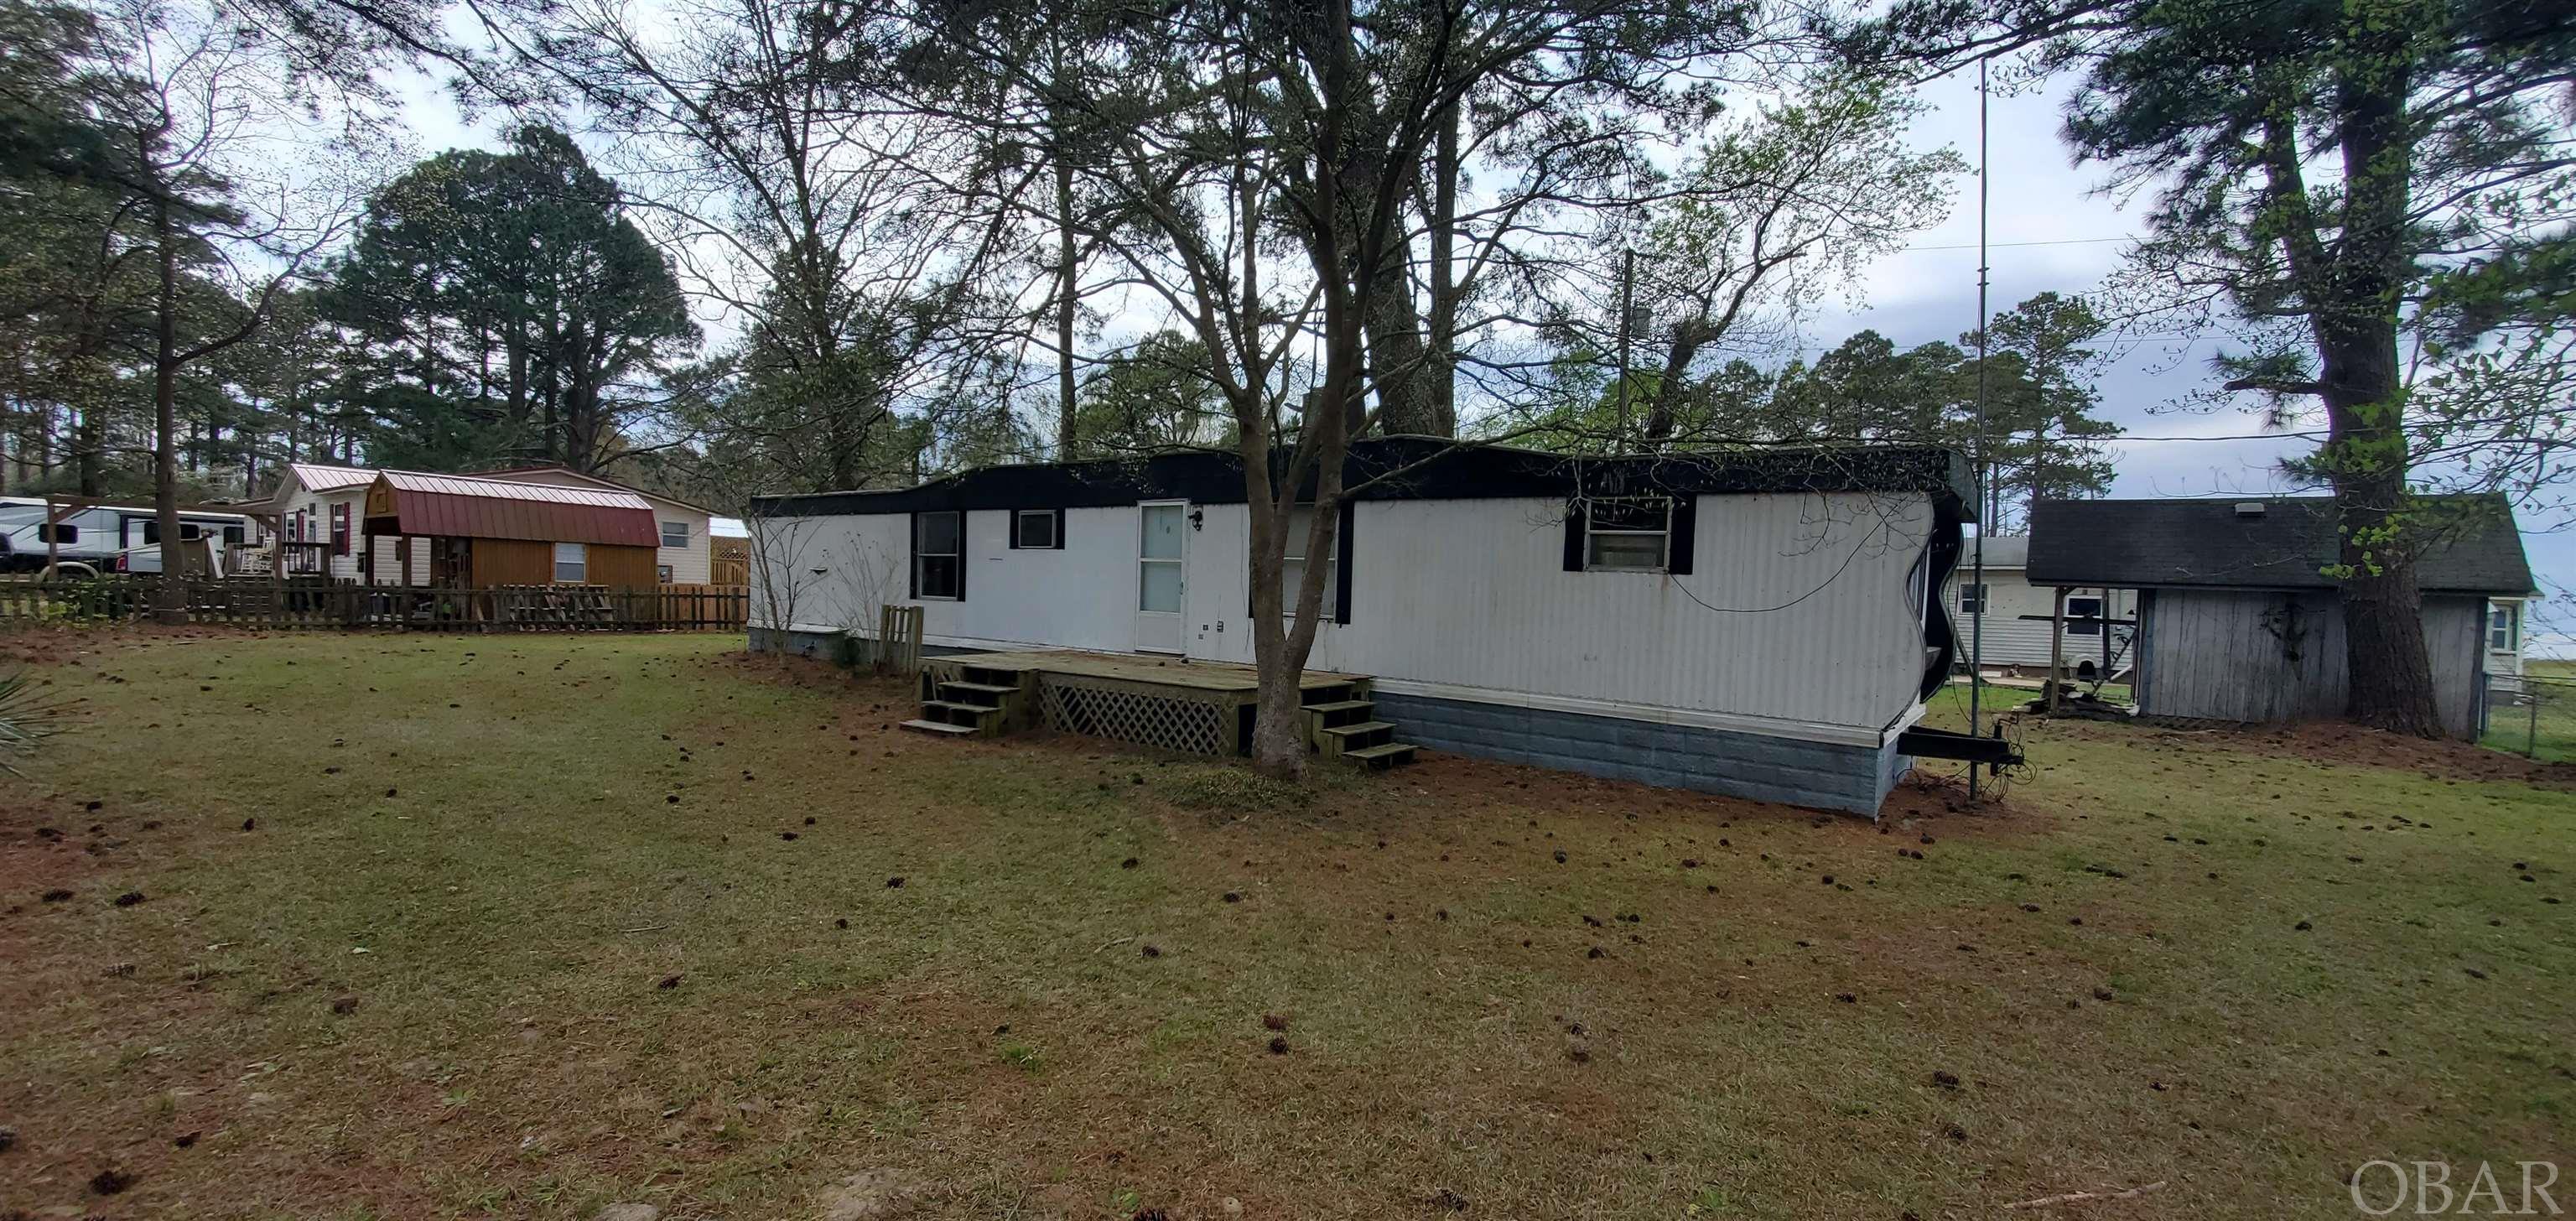 Imagine being surrounded by tall Pines and seeing amazing water views of the Albemarle Sound right from your back porch! This older single wide mobile home holds a lot of memories but needs TLC to be livable again. The property's location in the Va-Lee Beach community is close to the sound yet on high ground. Store all those fun water toys in the small shed and be ready for summer. This private, peaceful community provides you with direct access to the Albemarle Sound from the community boat launch with no HOA and no Fees! Va-Lee Beach is on a paved, Dead End road. Pets are welcome in this family friendly waterfront community. Being offered at Land Value only price.